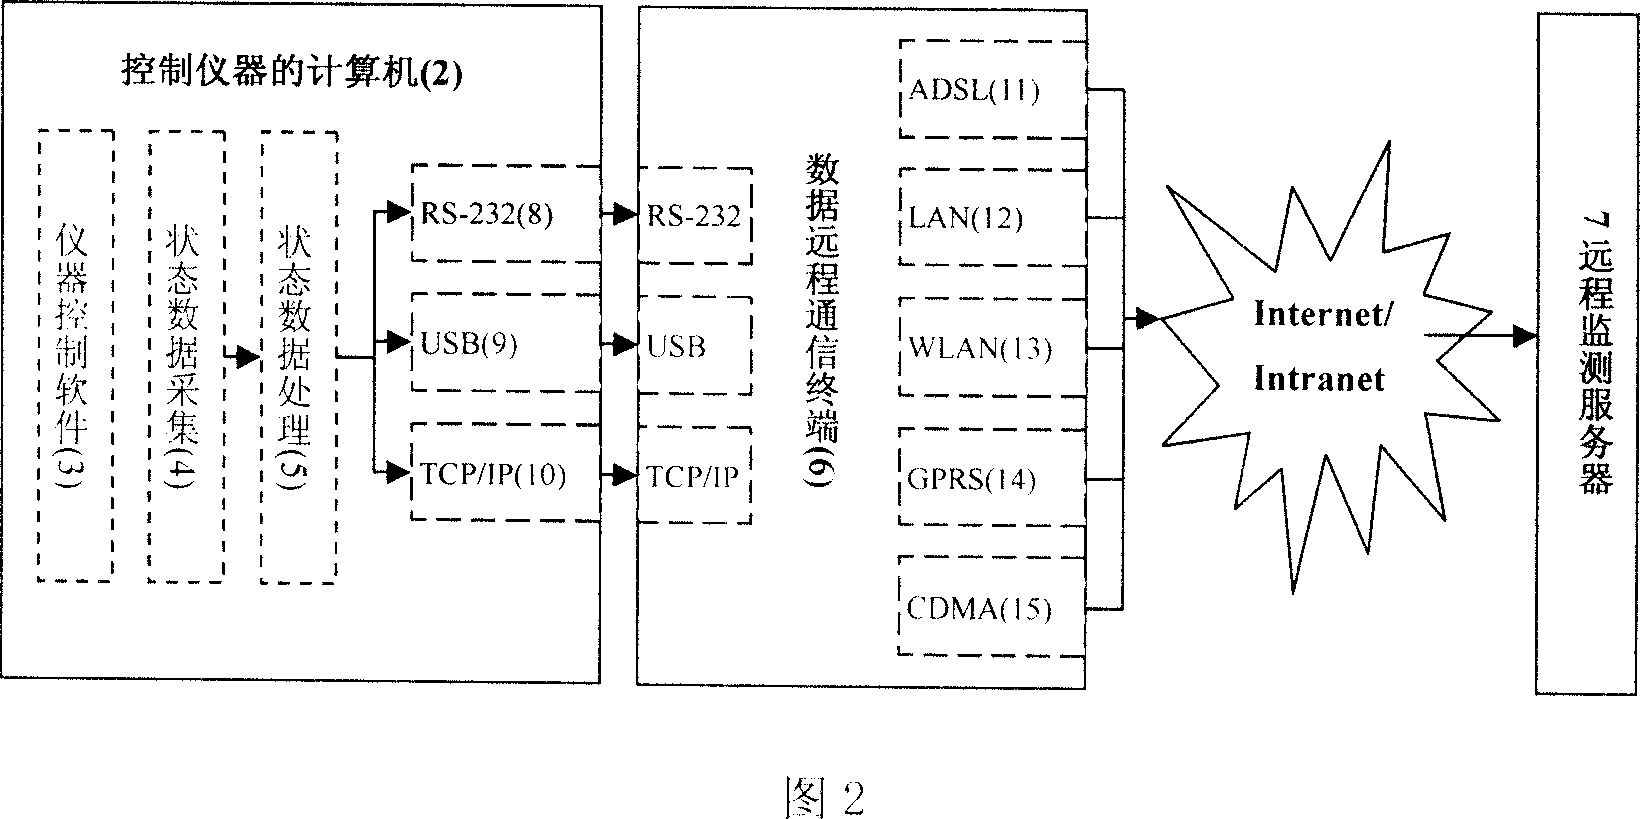 Scientific instrument work state monitoring method based on control computer